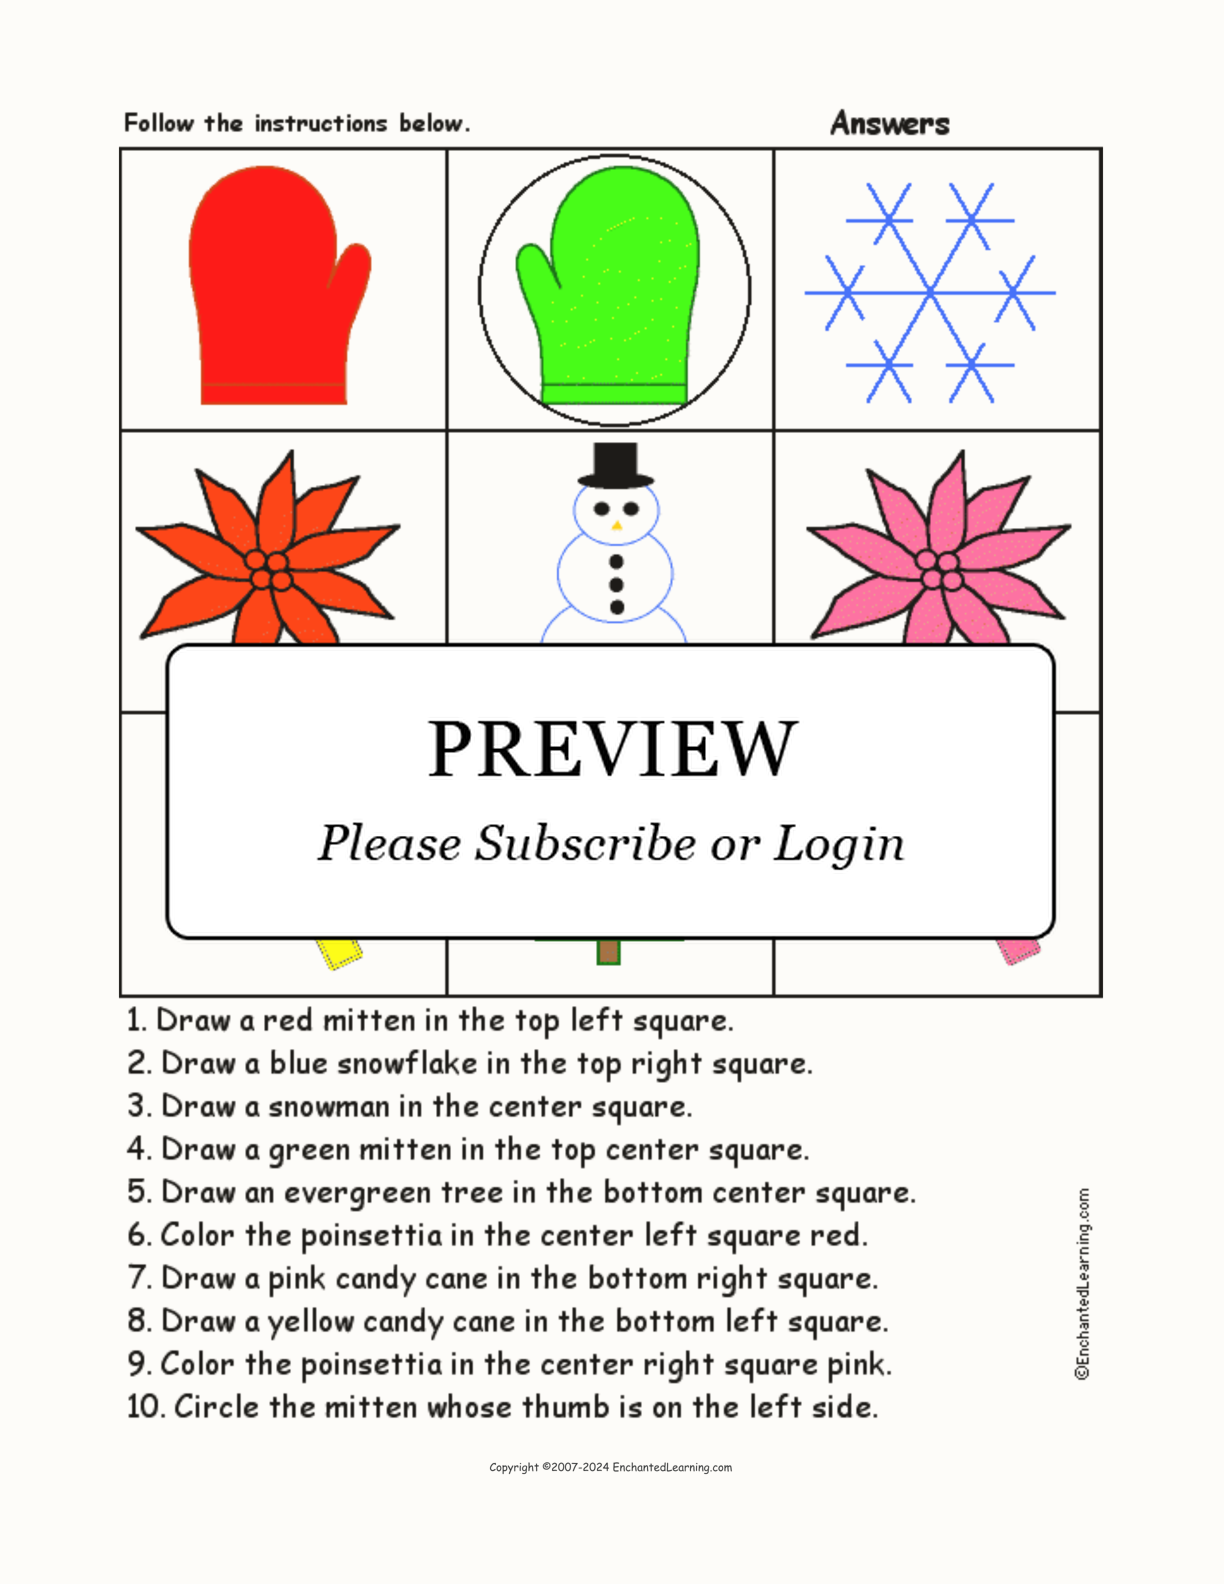 Winter - Follow the Instructions interactive worksheet page 2